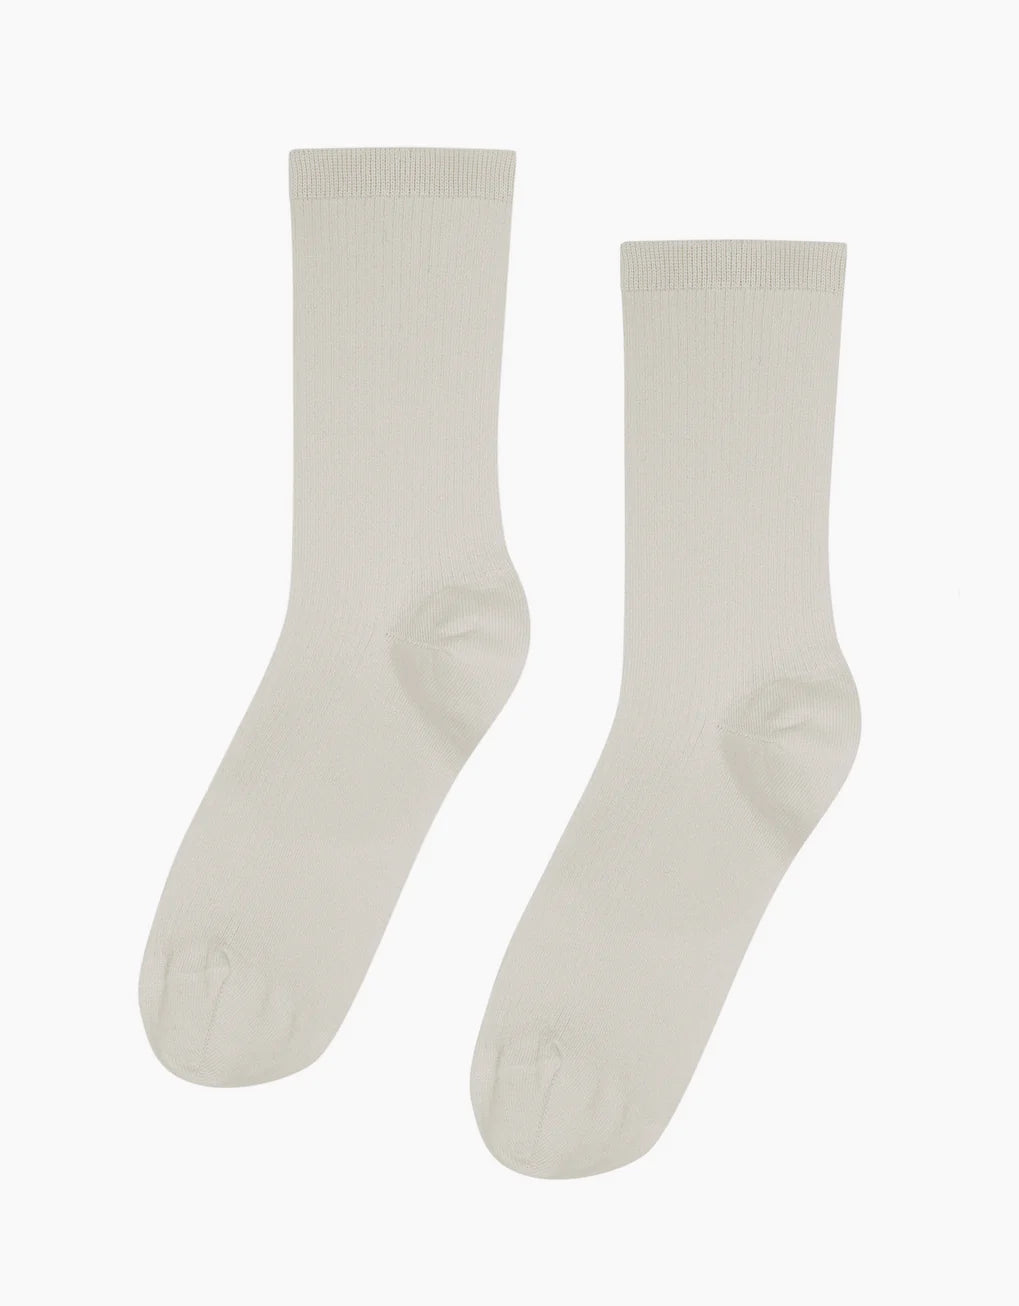 A pair of Colorful Standard Classic Organic Socks made with organic cotton on a white background.